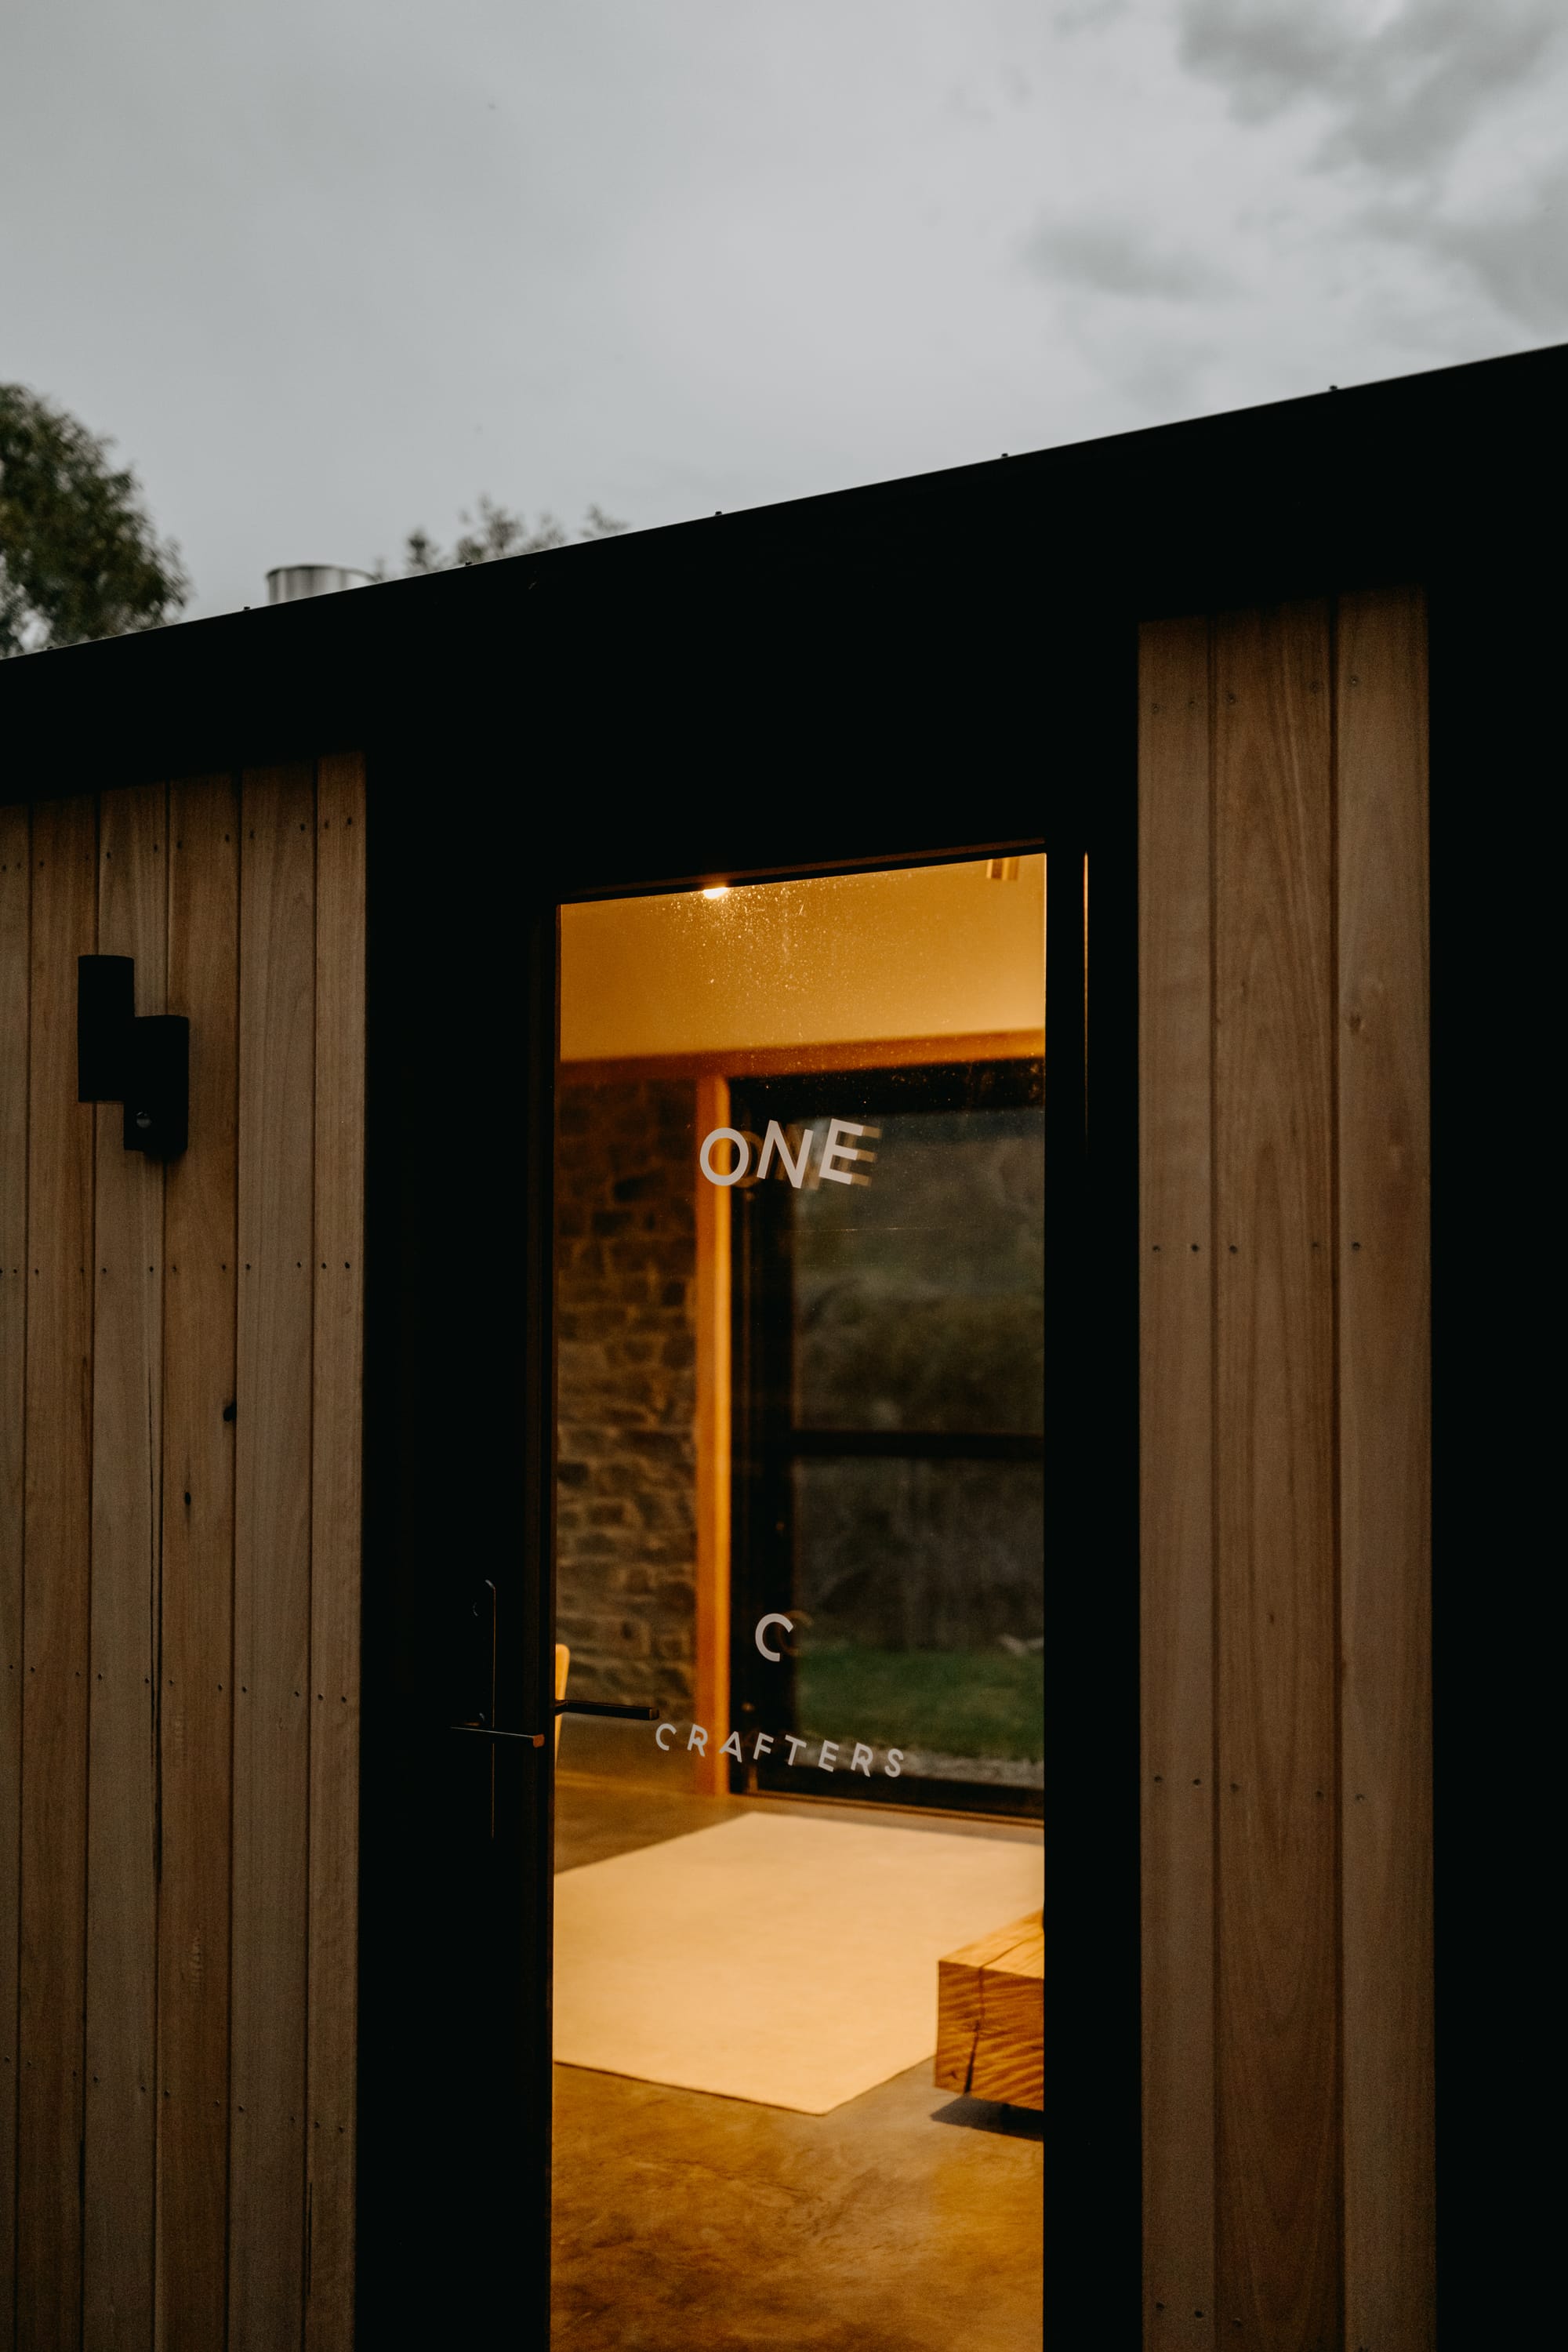 Crafters Eco-Cabins. Image copyright of Crafters. Glass door with white text font. Woooden clad walls.